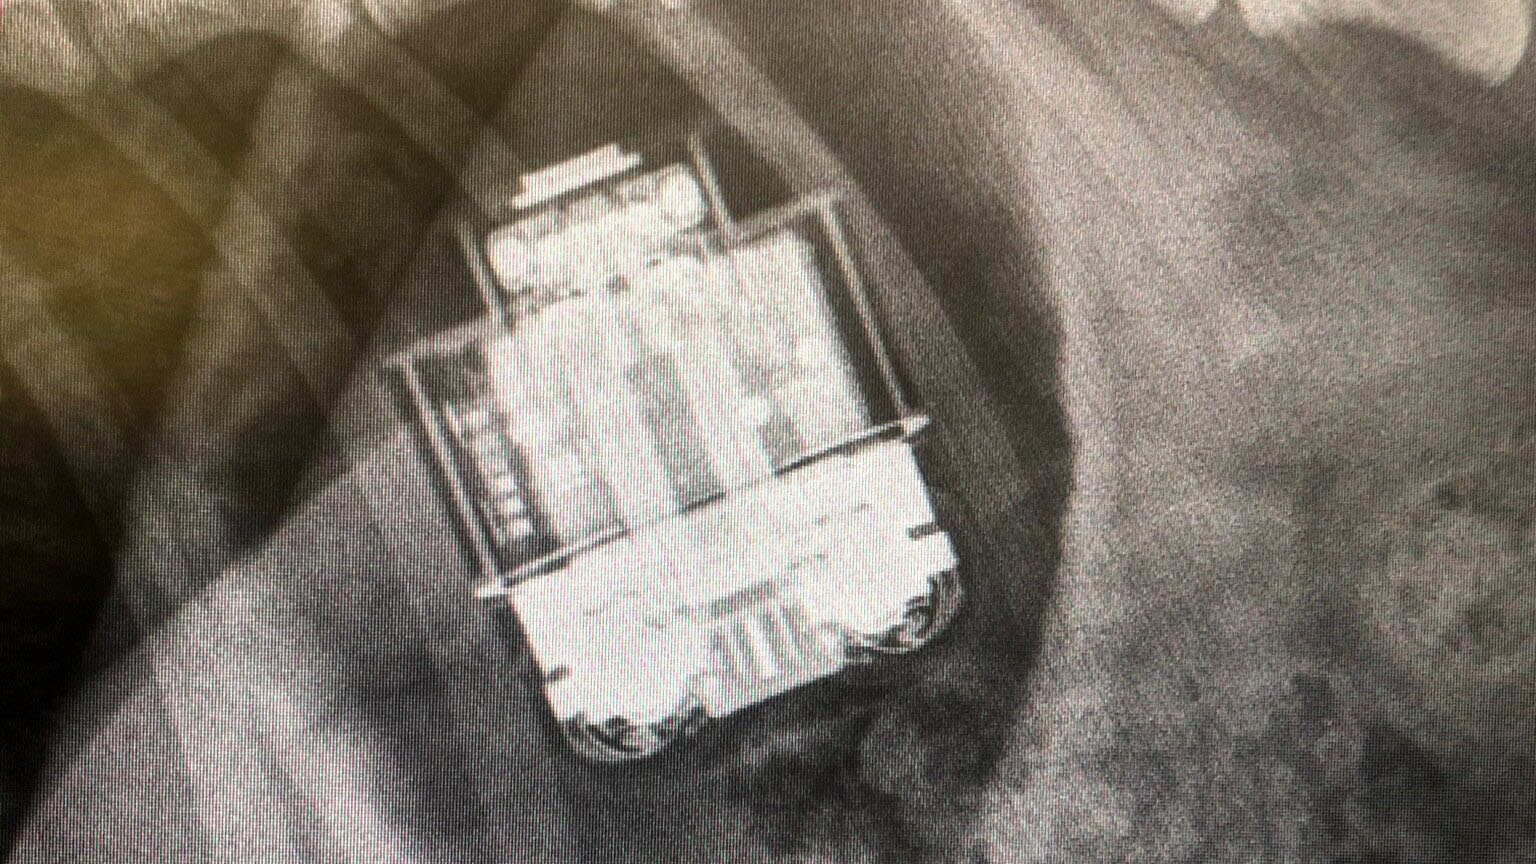 AirPods in dog's stomach